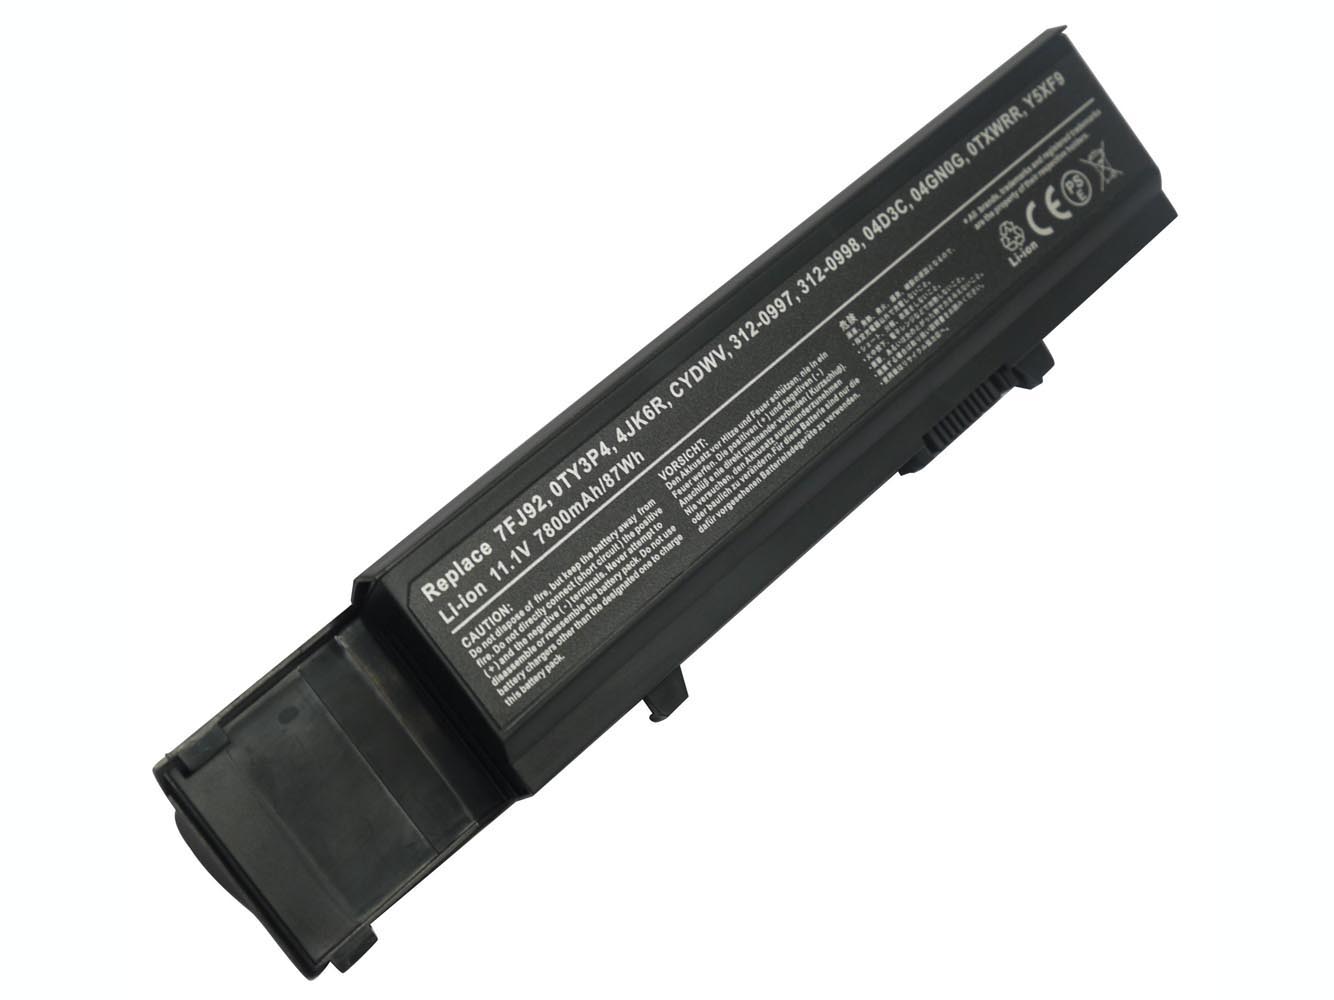 04D3C, 04GN0G replacement Laptop Battery for Dell Vostro 3400, Vostro 3500, 4400mAh, 11.10V